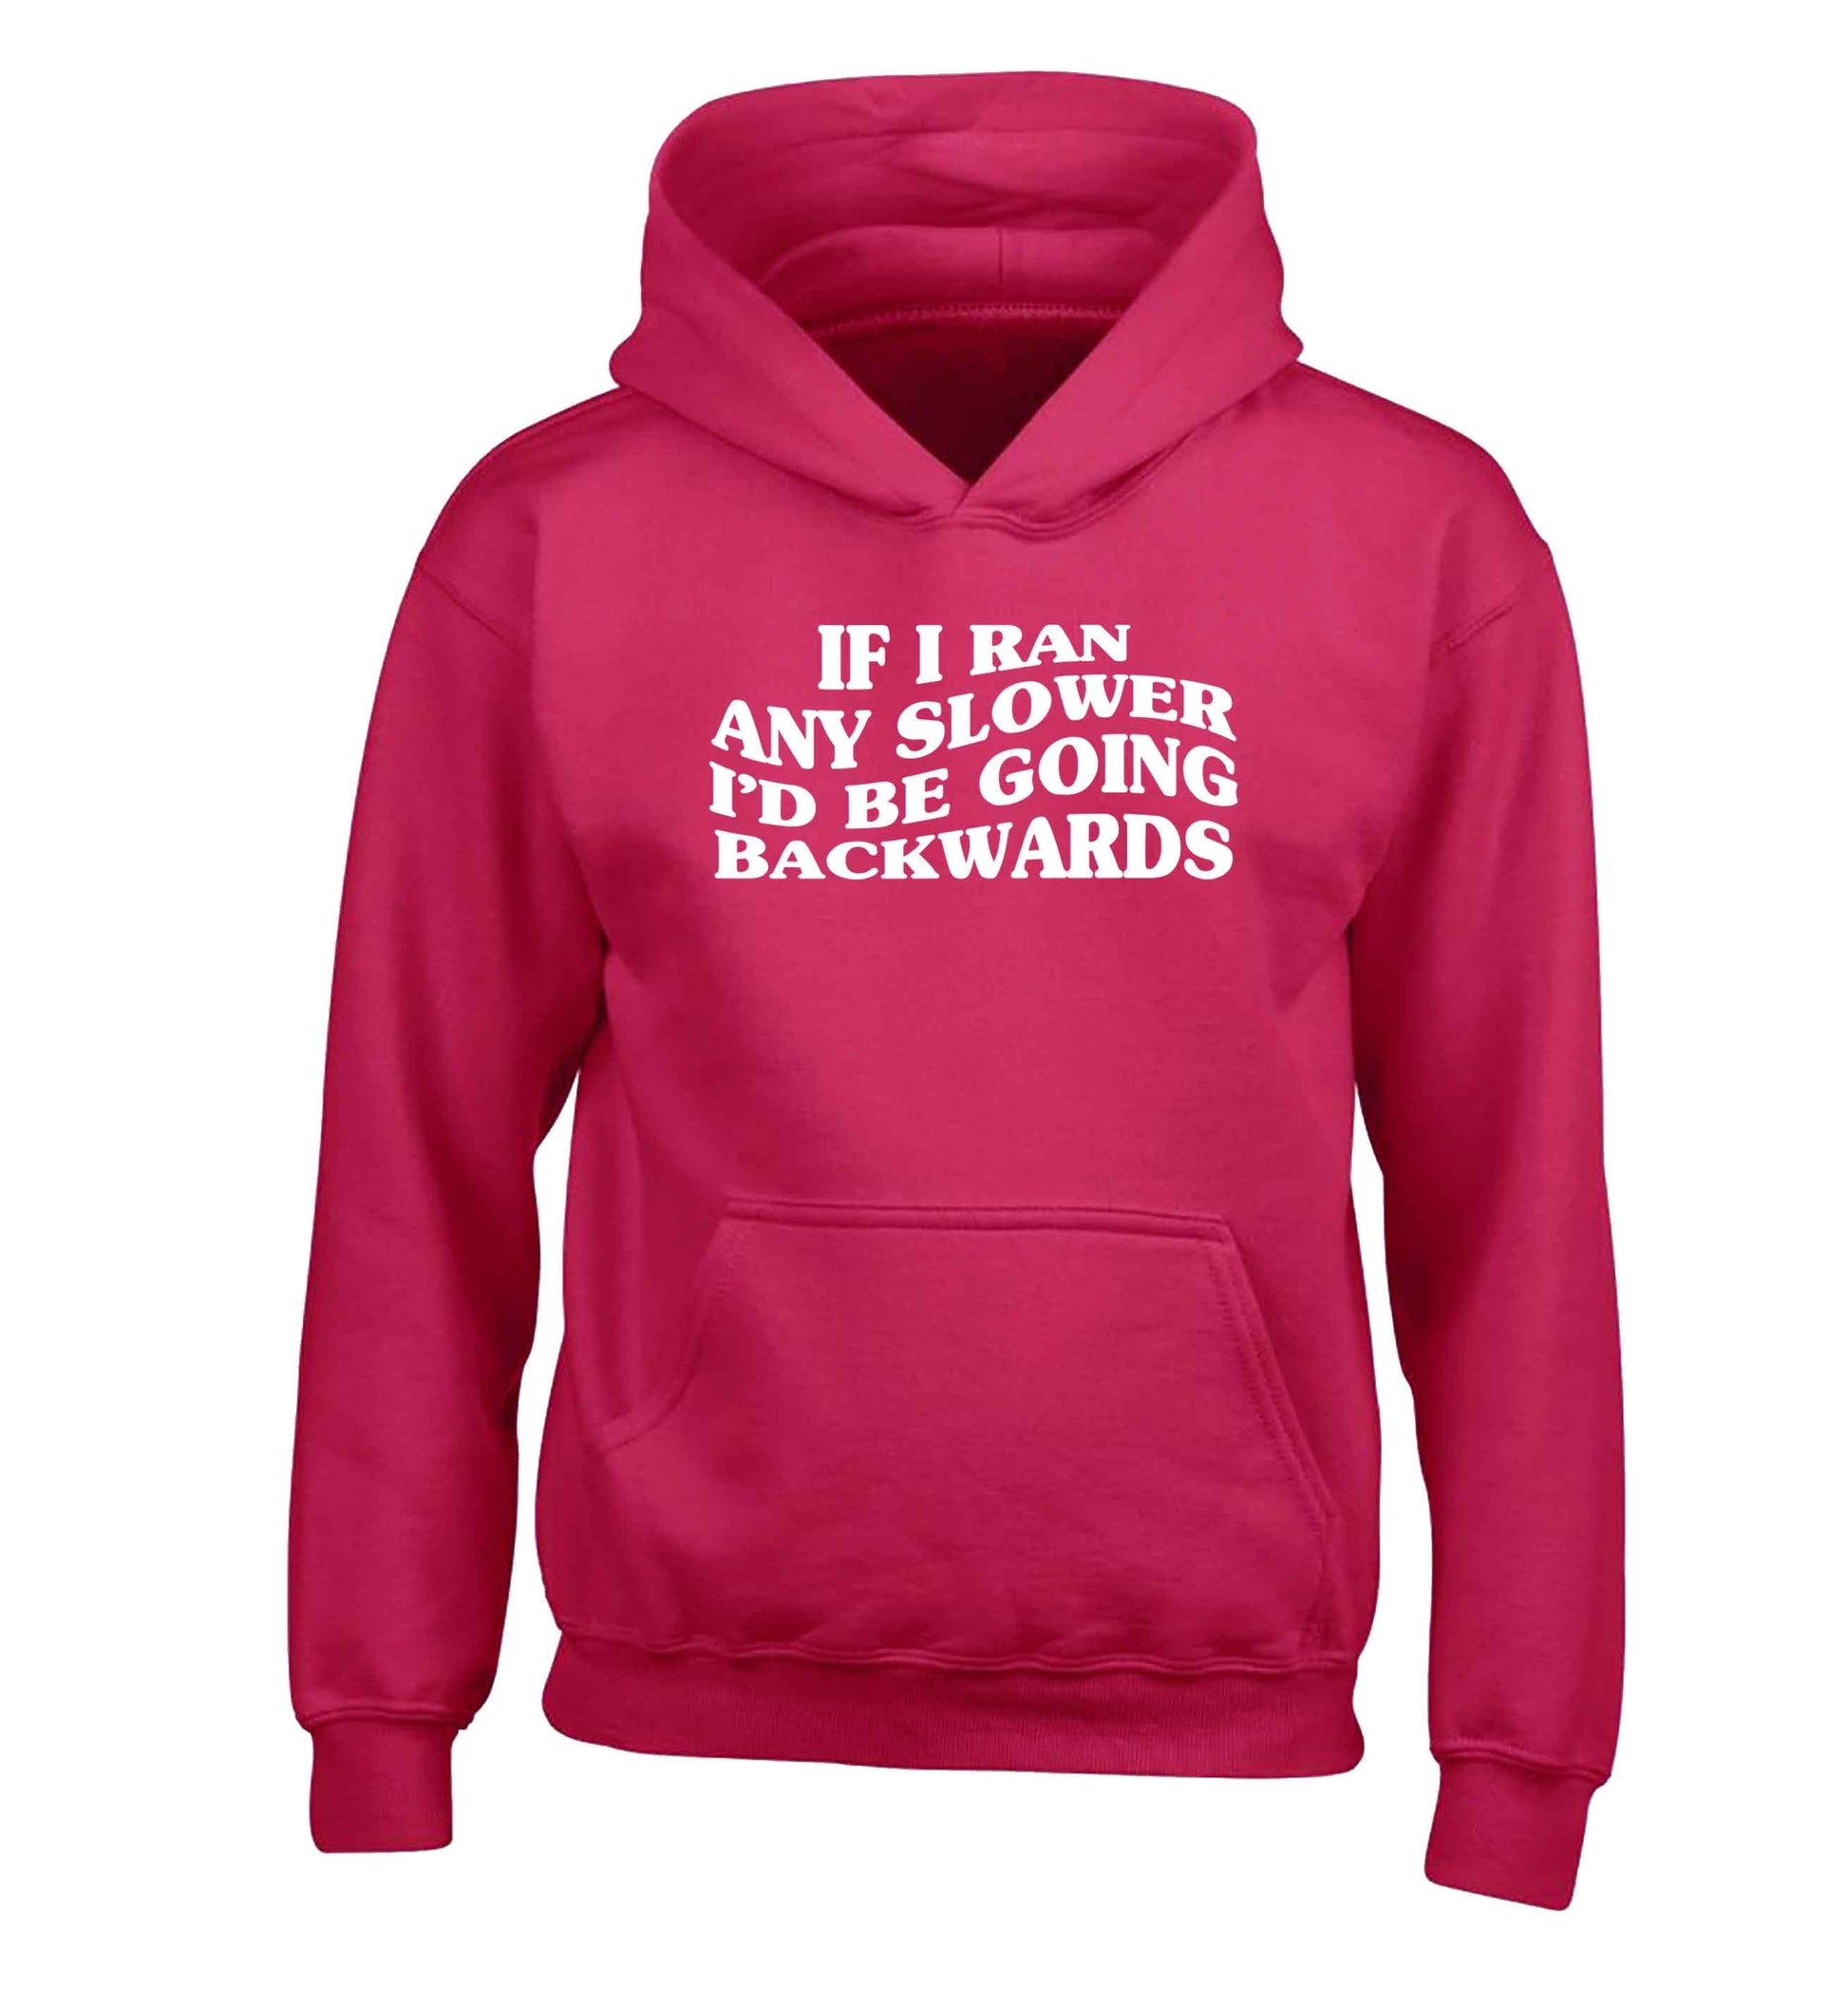 If I ran any slower I'd be going backwards children's pink hoodie 12-13 Years